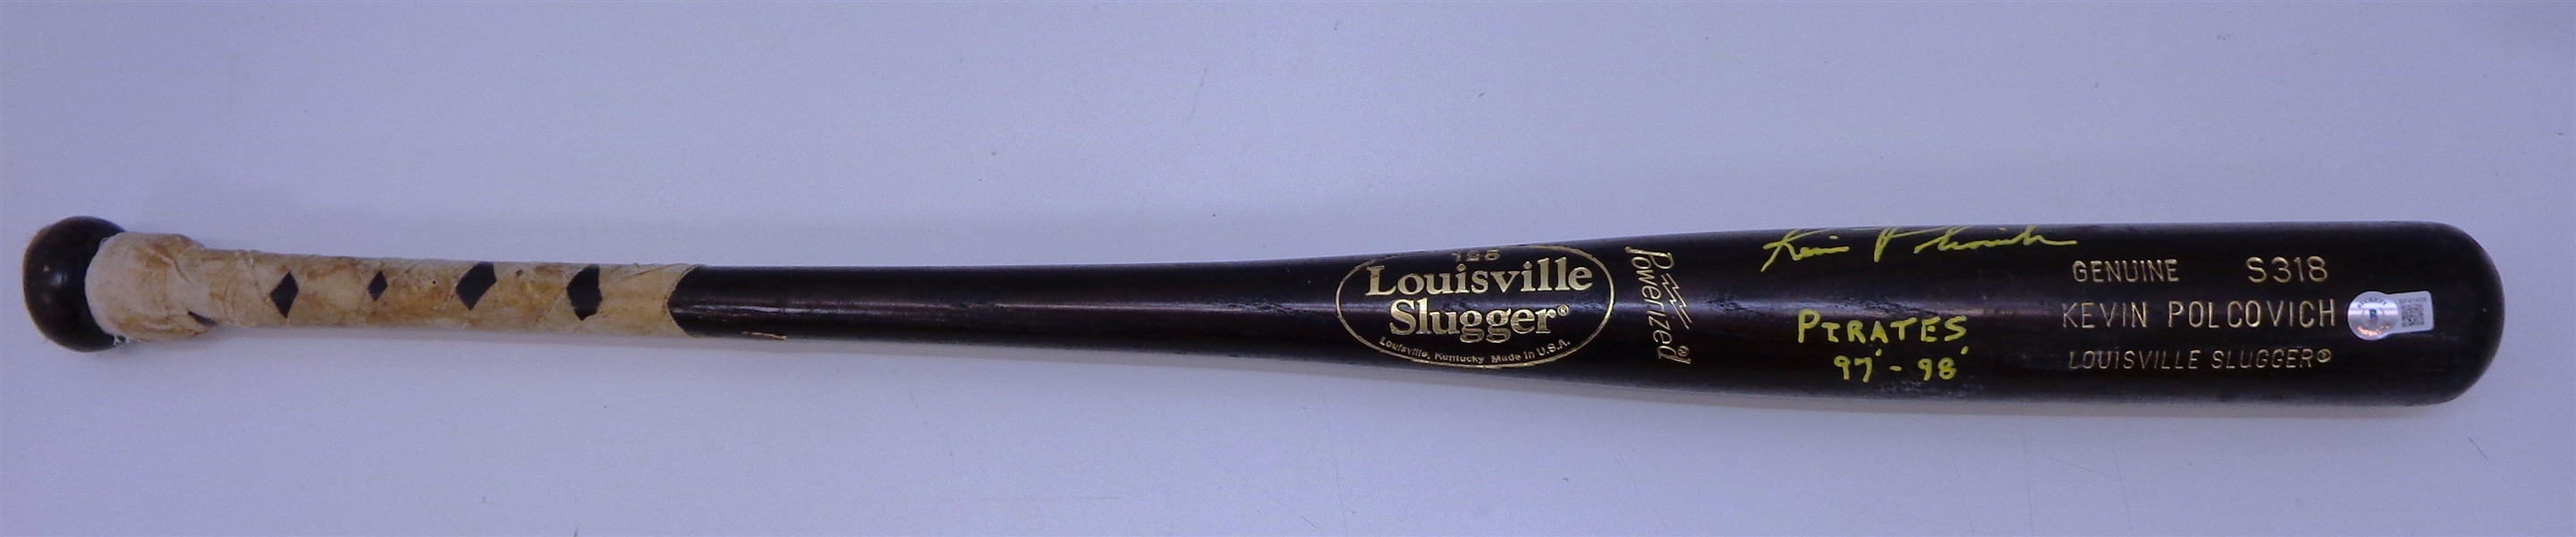 Kevin Polcovich Autographed Game Used Bat